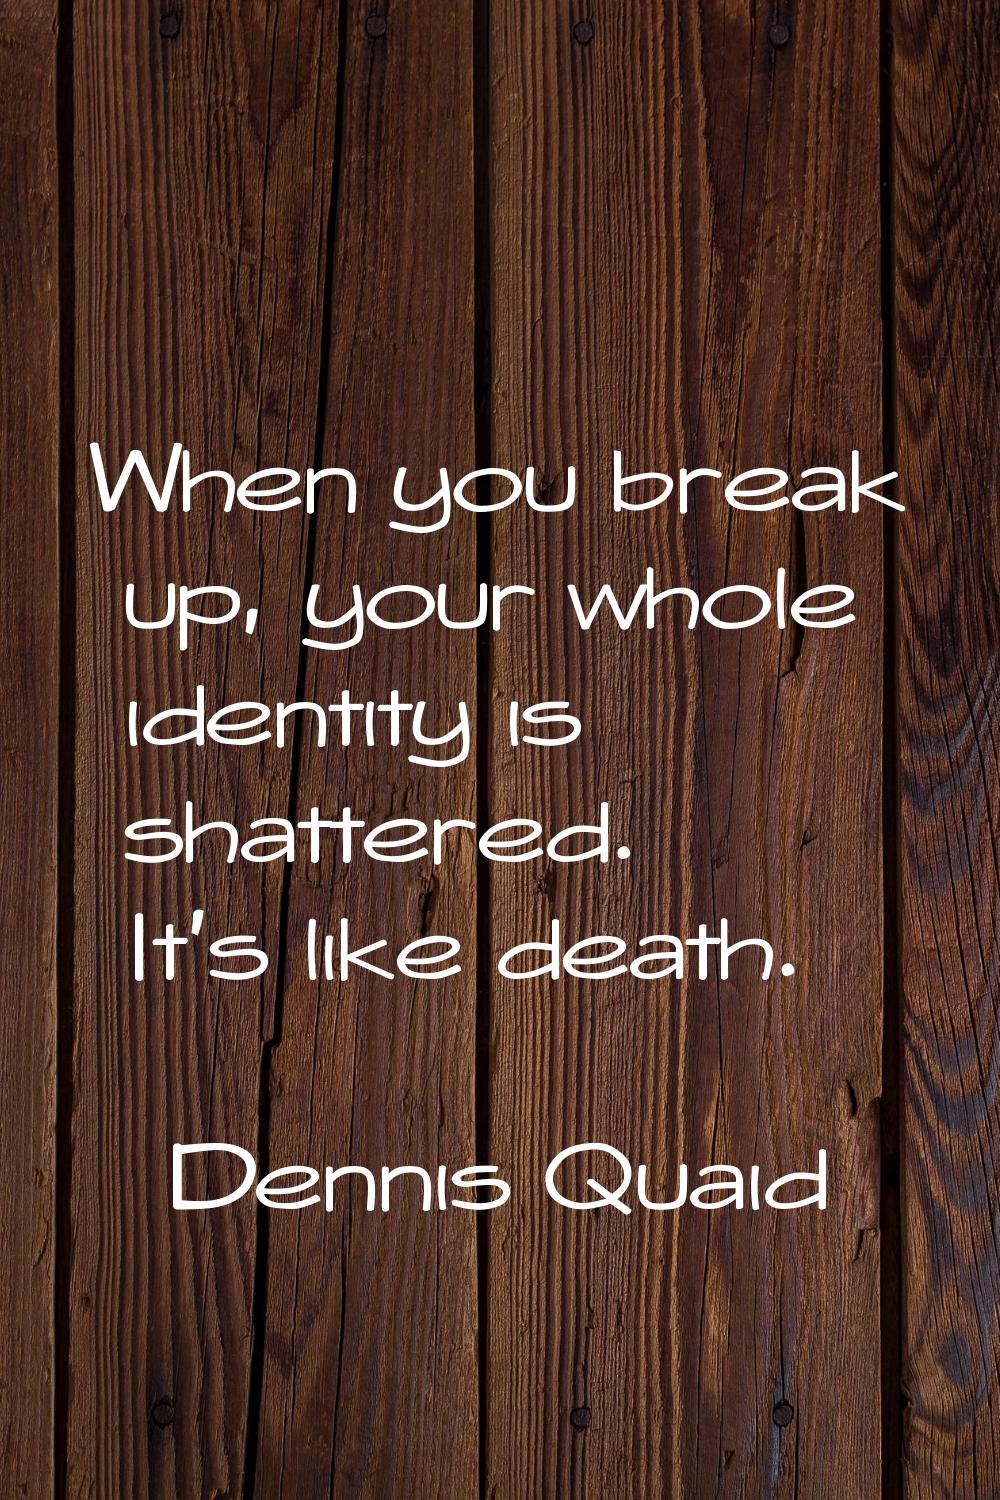 When you break up, your whole identity is shattered. It's like death.